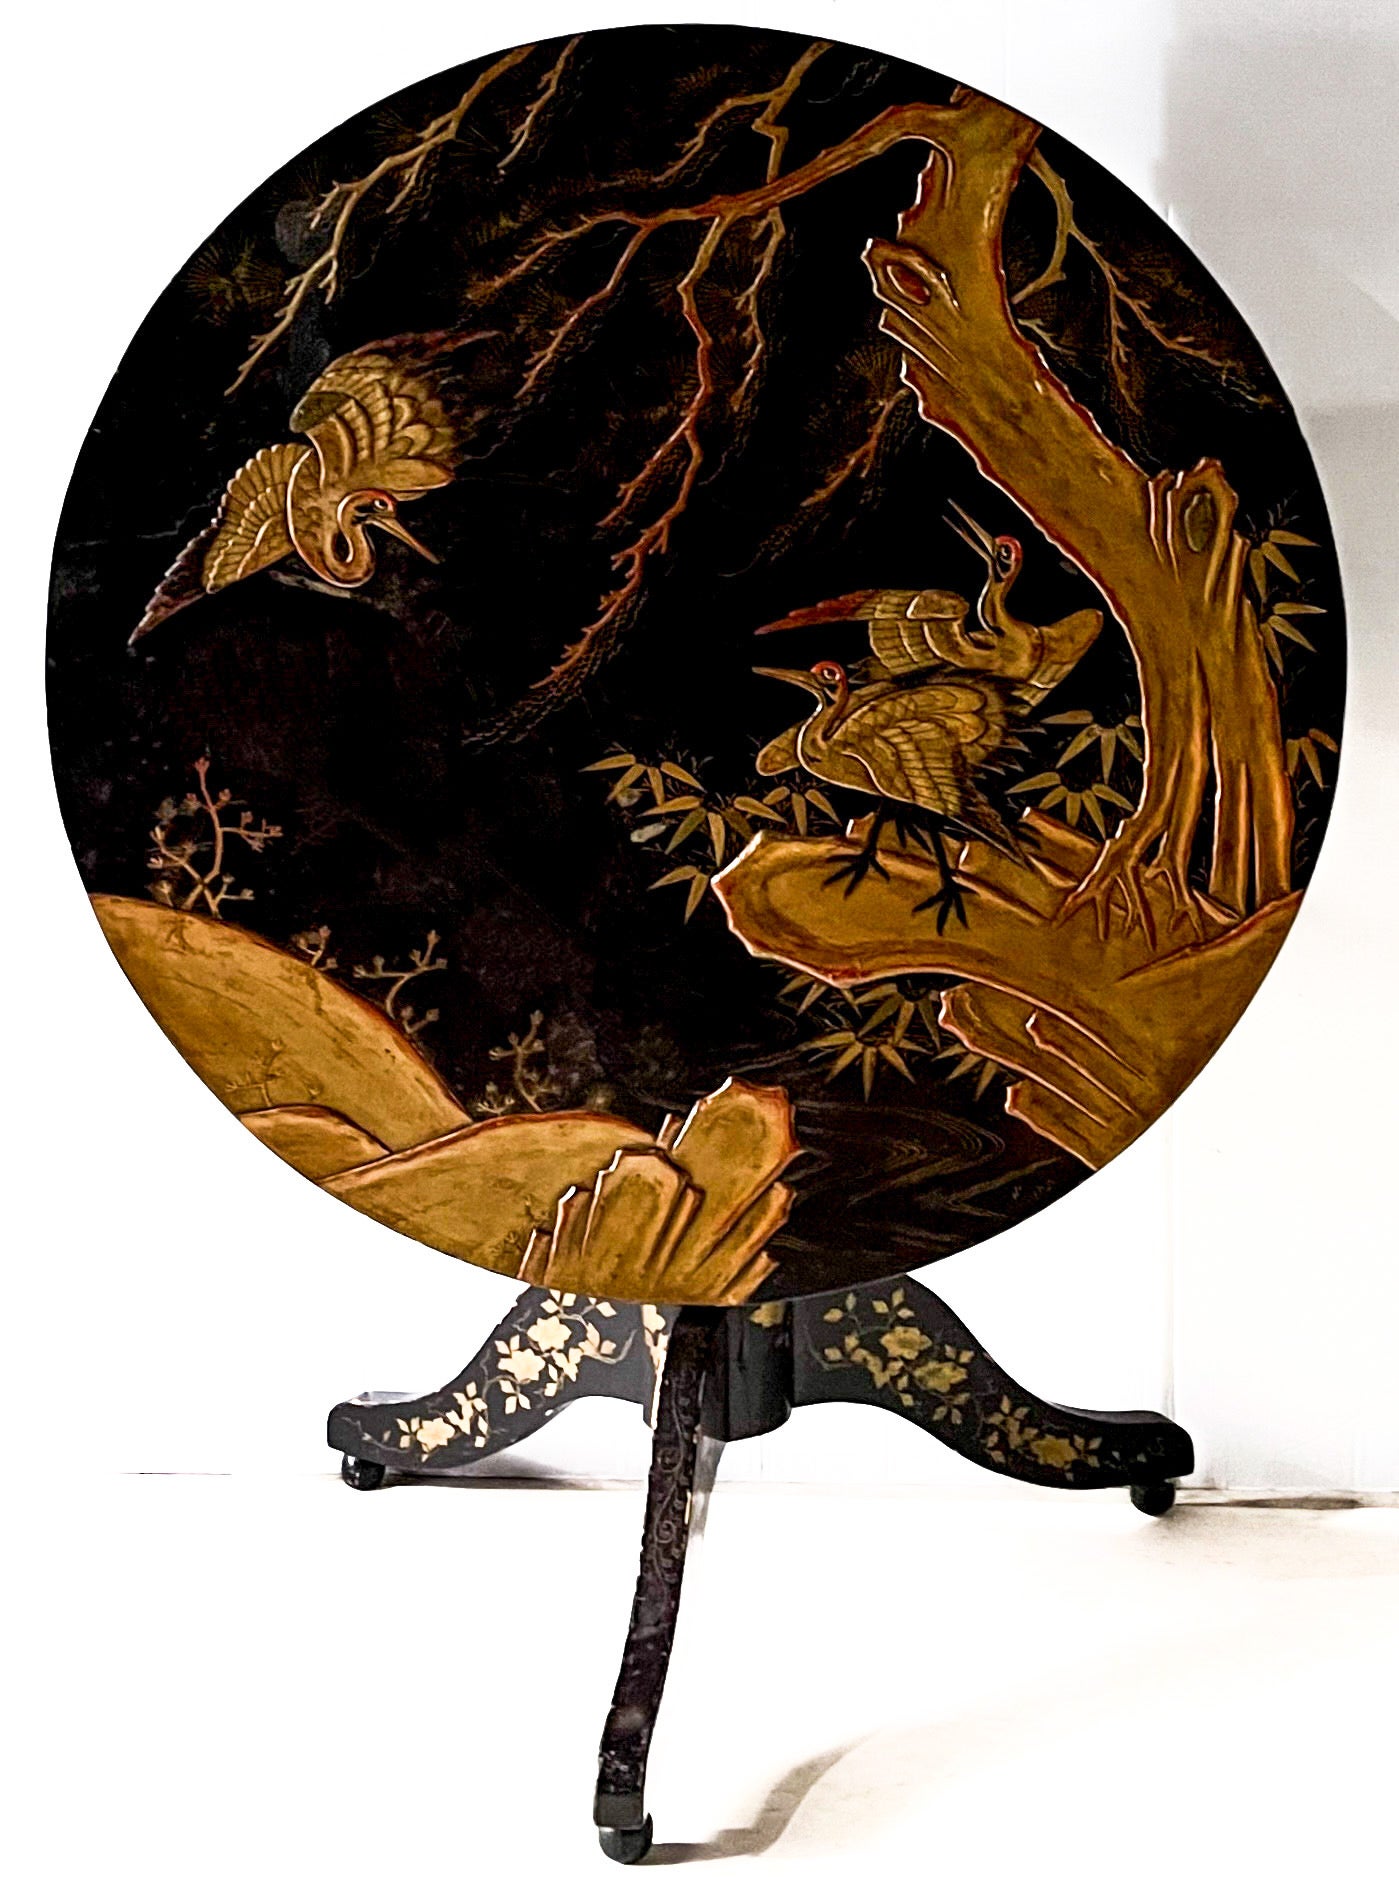 This is a special piece! It is a large scale ebonized tilt-top 19th century English chinoiserie table. It would work well as a dining or center table as it is fifty inches in diameter. The piece is japanned with cranes and foliage. The splayed